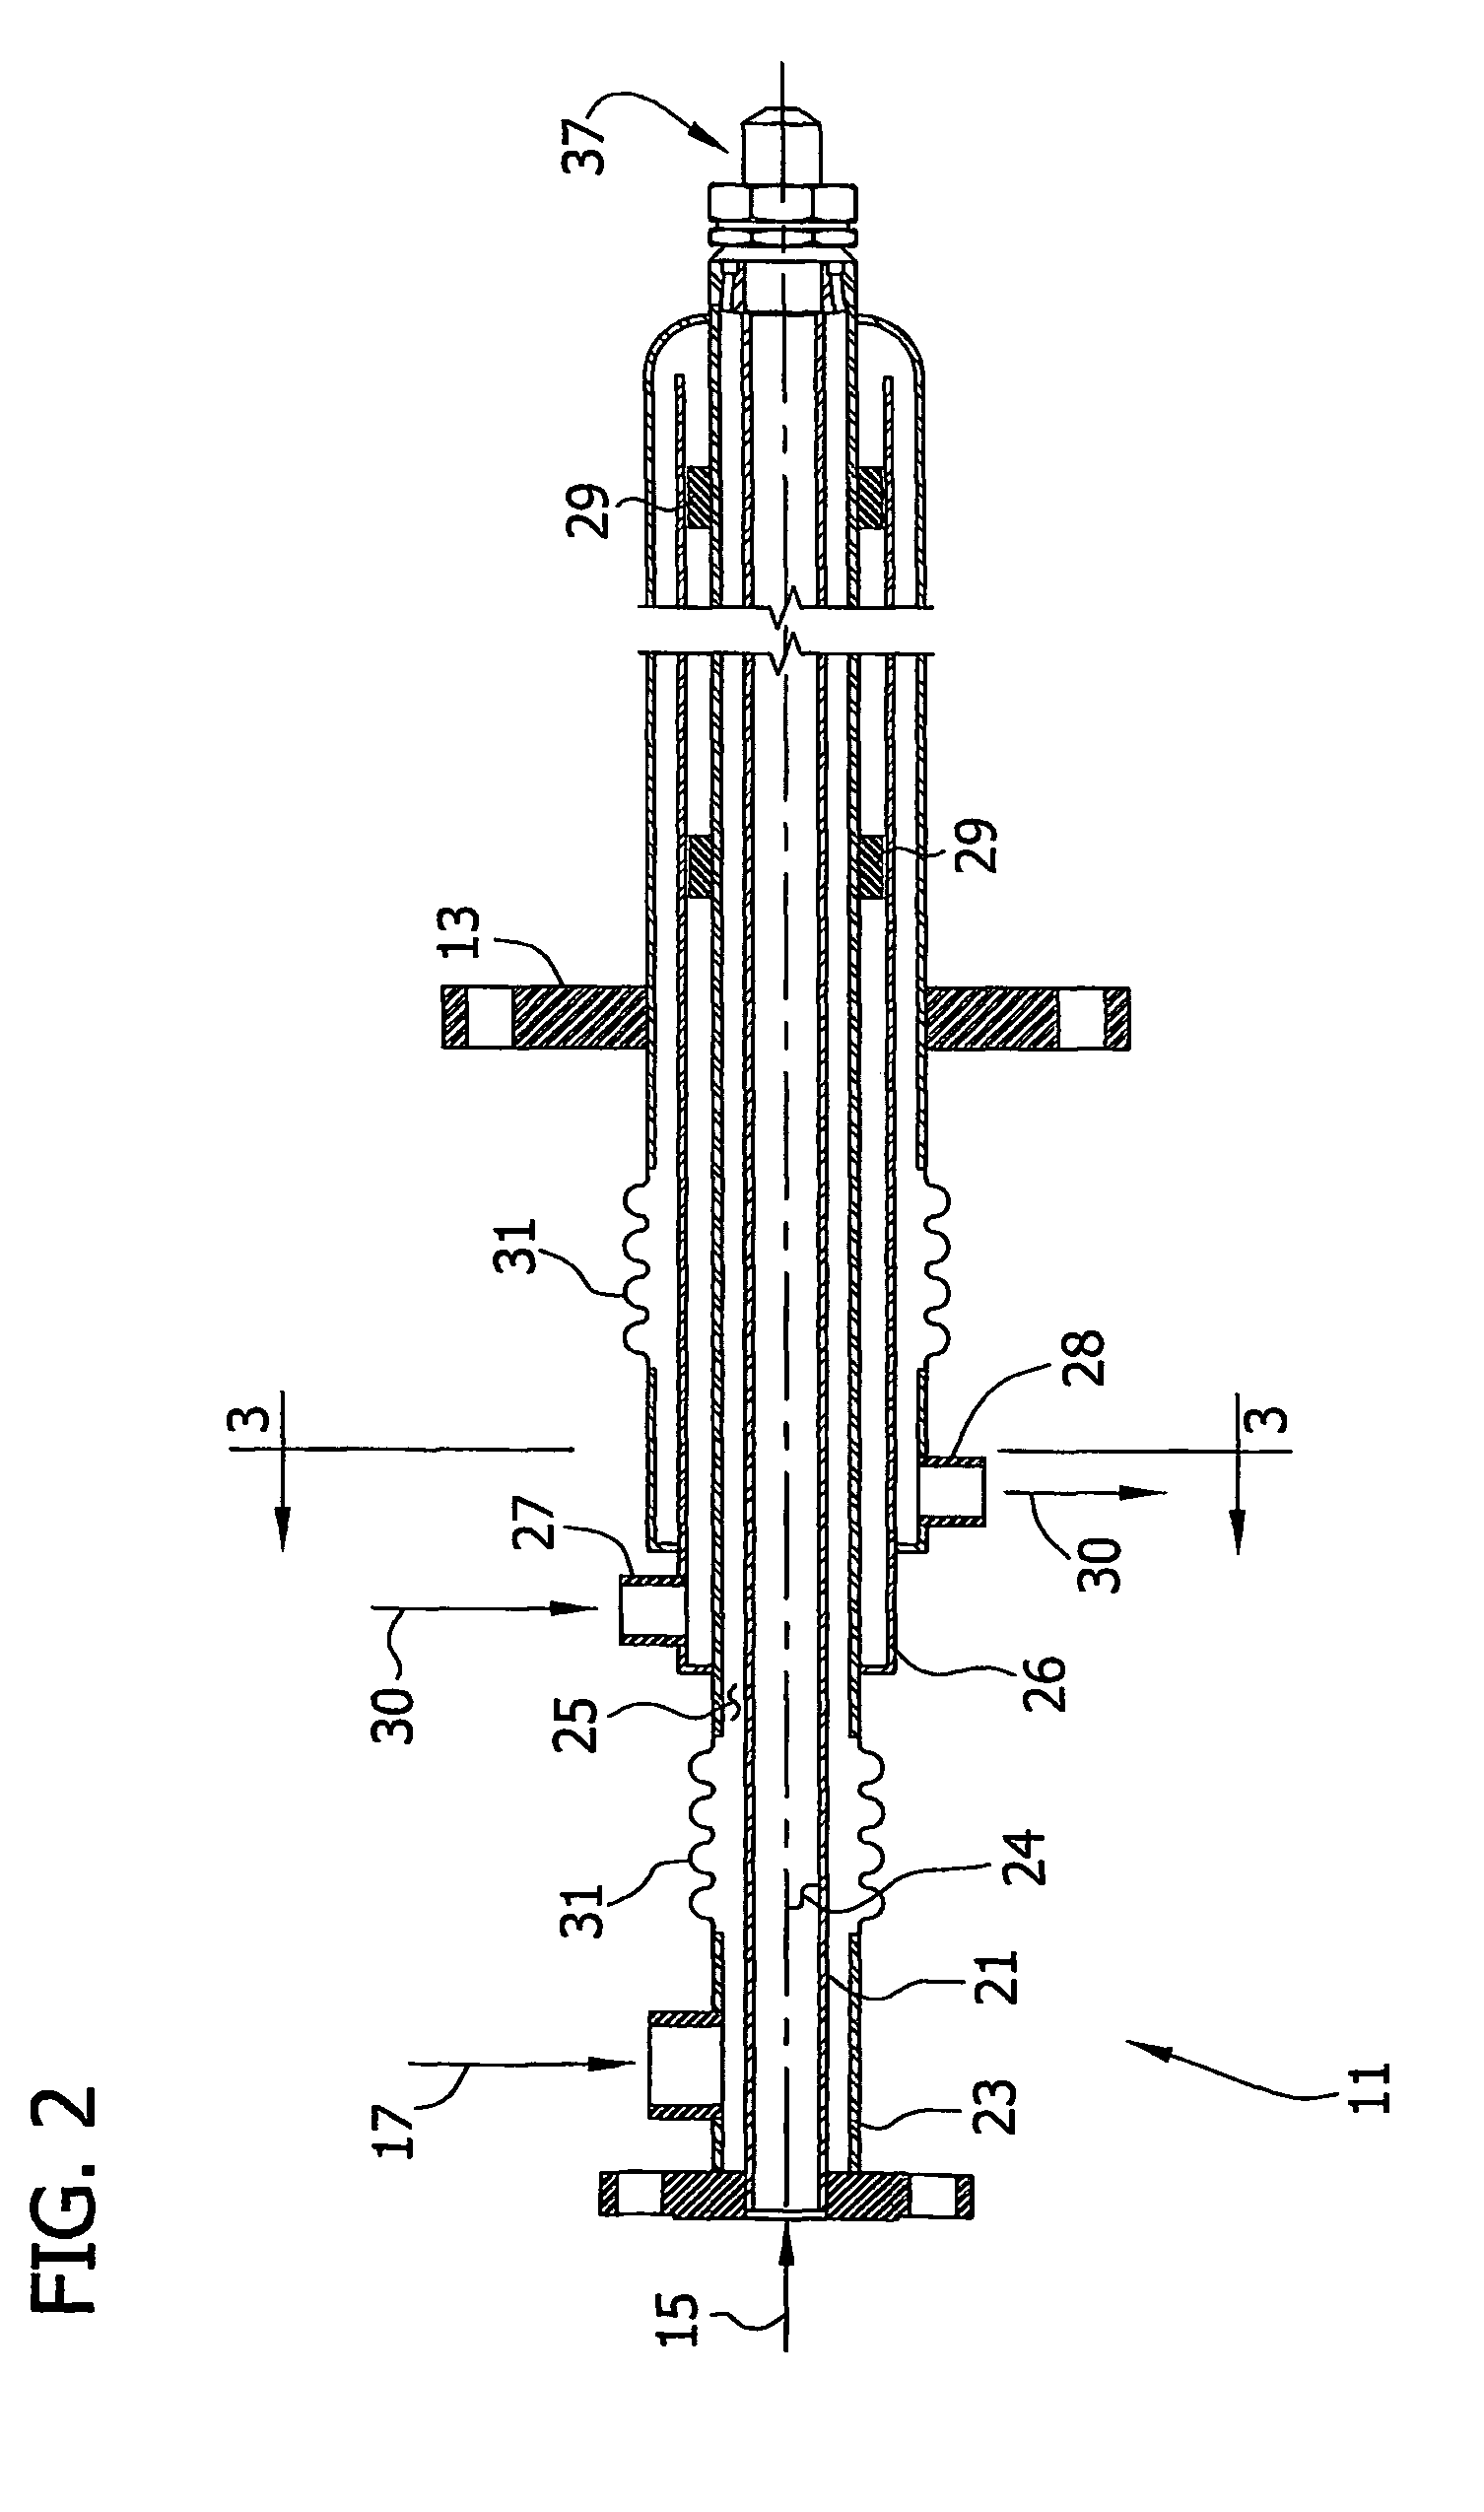 Process and apparatus for the combustion of a sulfur-containing liquid